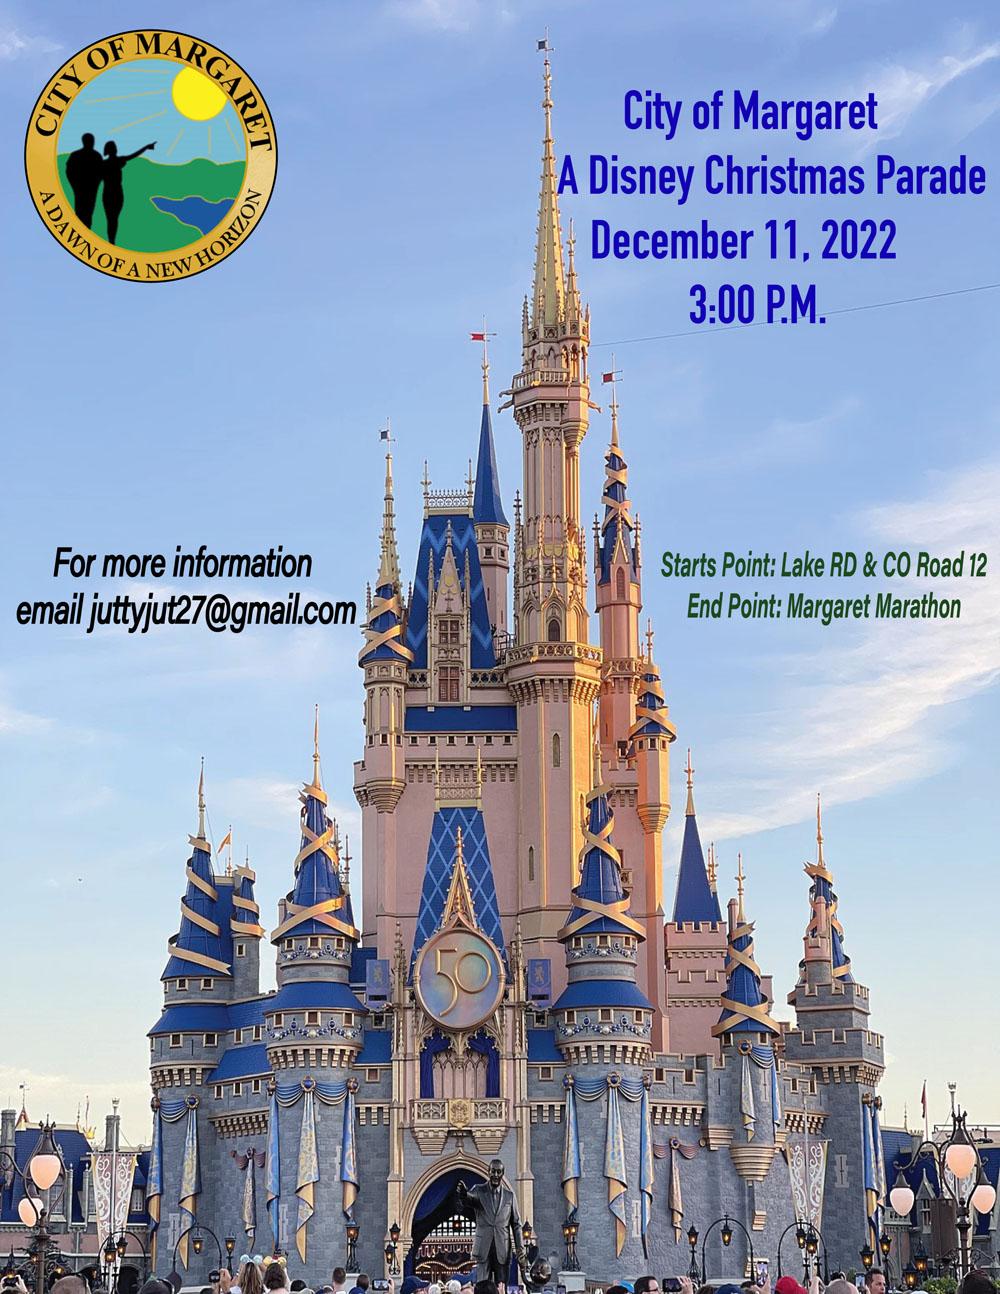 The City of Margaret Christmas Parade 2022 is scheduled for Sunday, December 11 at 3:00 pm. starting point Lake Rd & County Rd 12